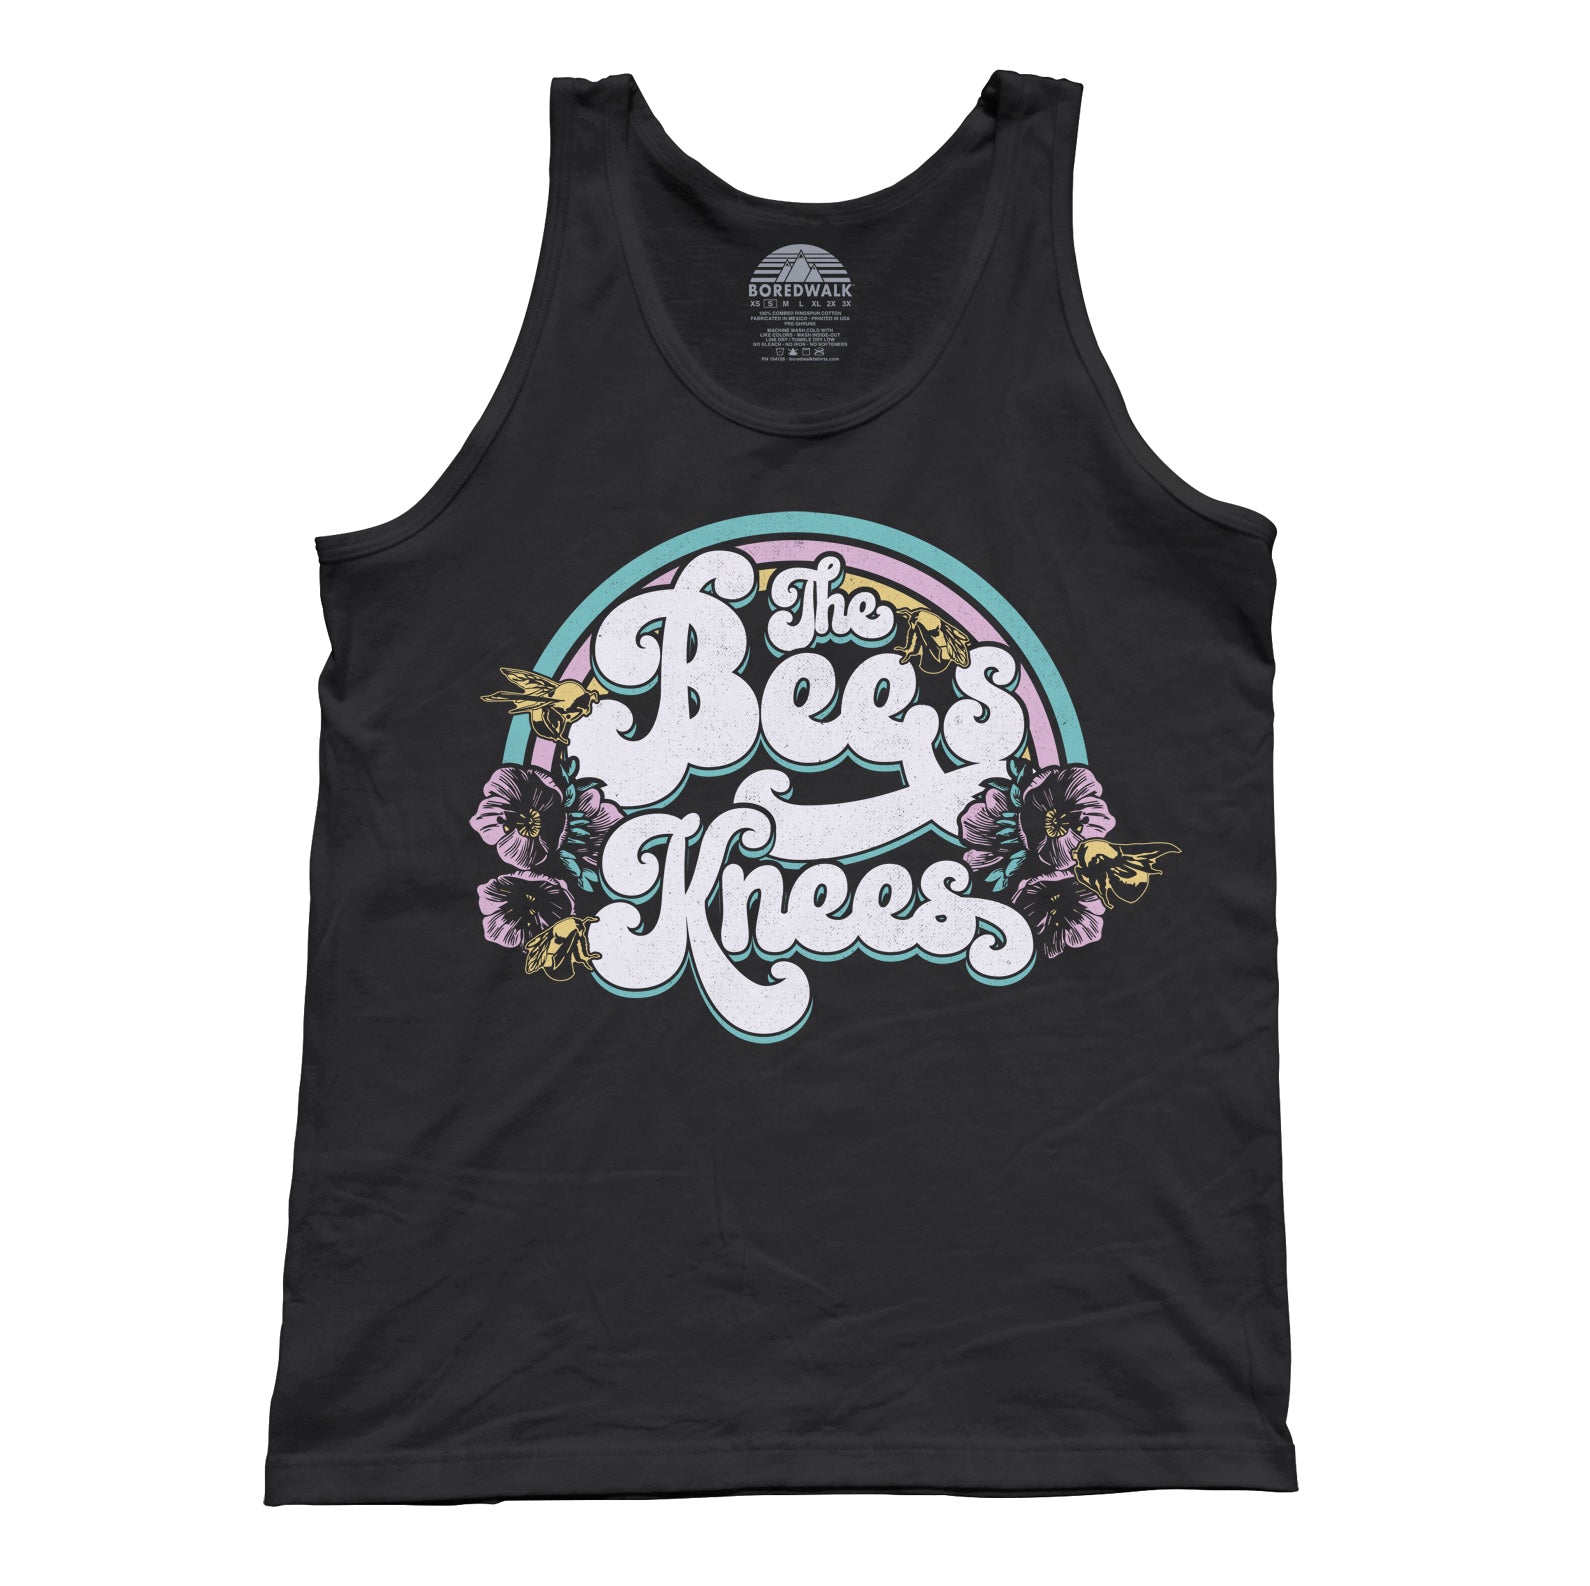 Unisex The Bees Knees Tank Top